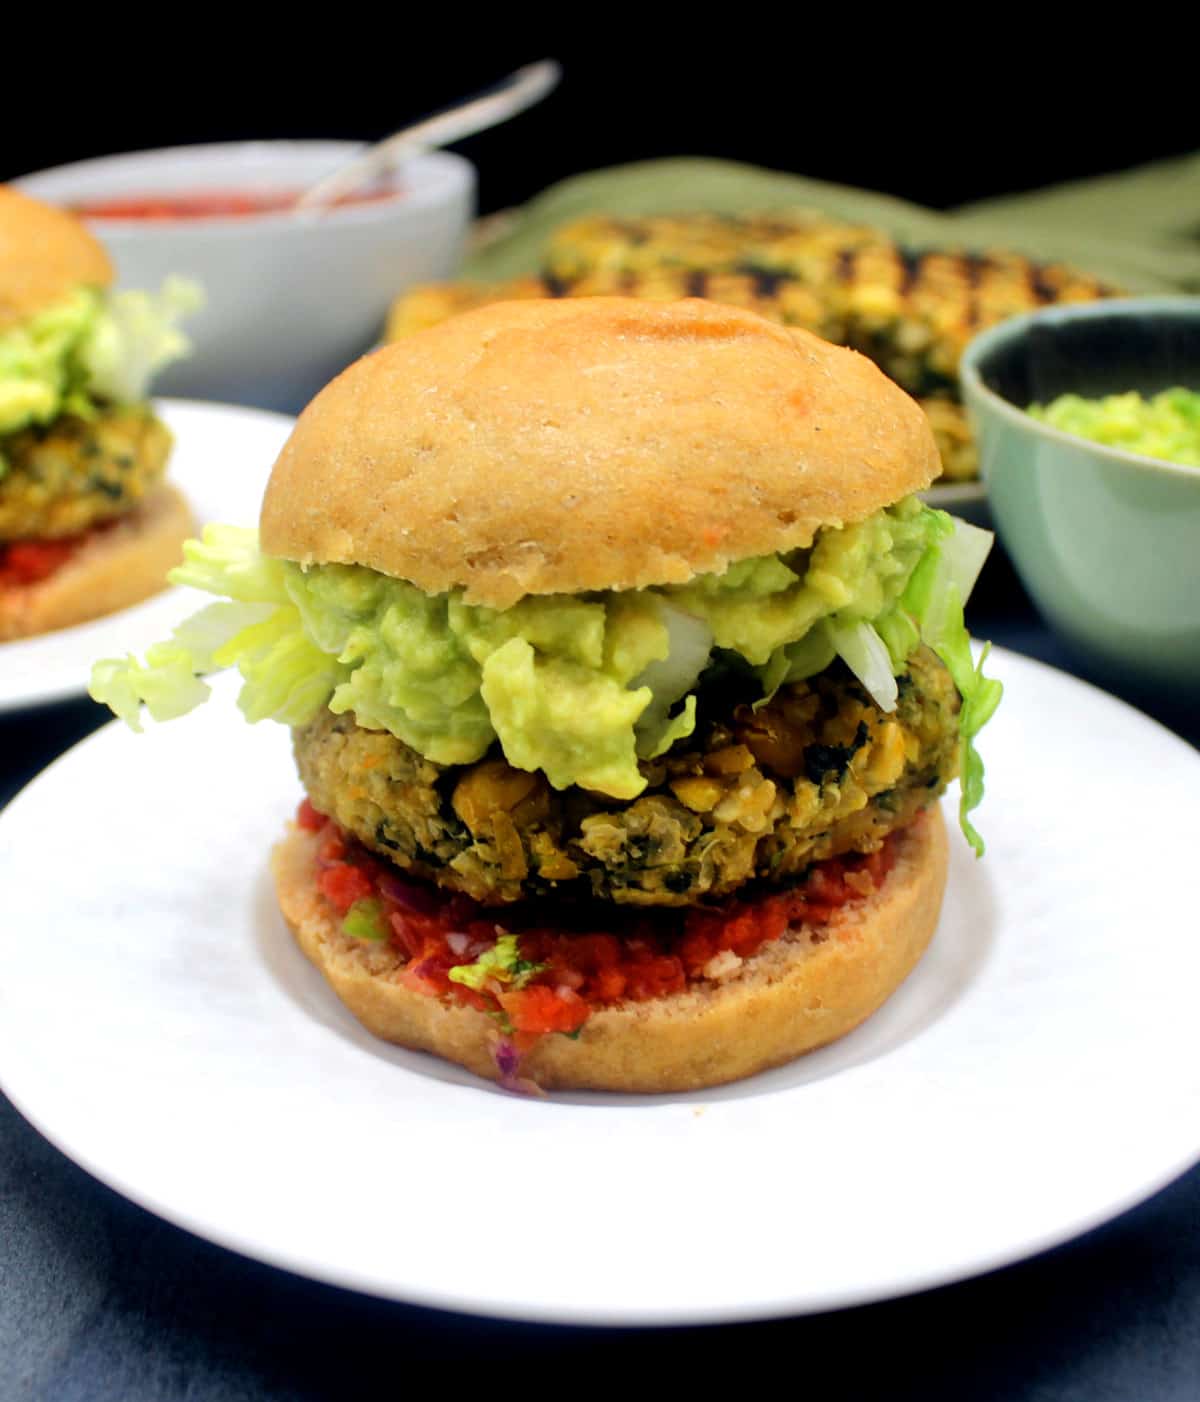 Vegan chickpea quinoa burger on white plate with toppings in background.